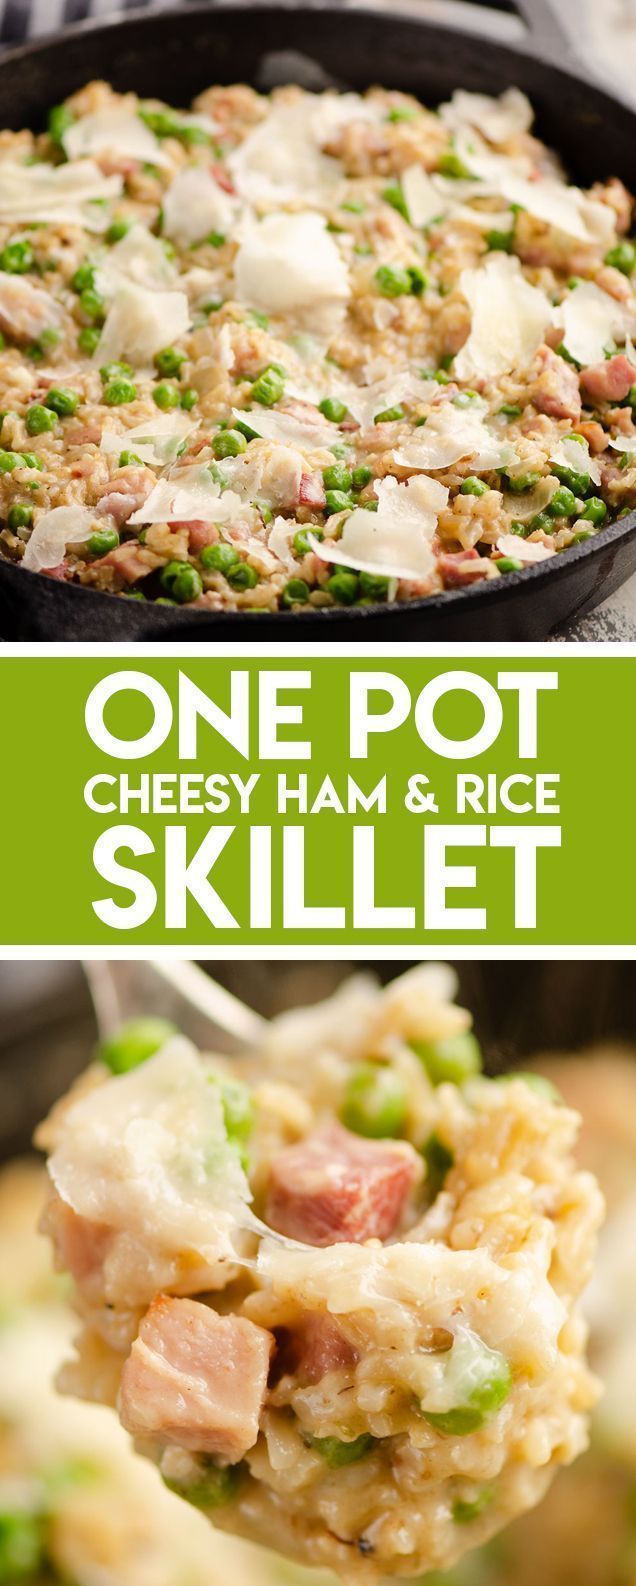 One Pot Cheesy Ham & Rice Skillet - Lightened Up! -   17 healthy recipes Rice cheese ideas